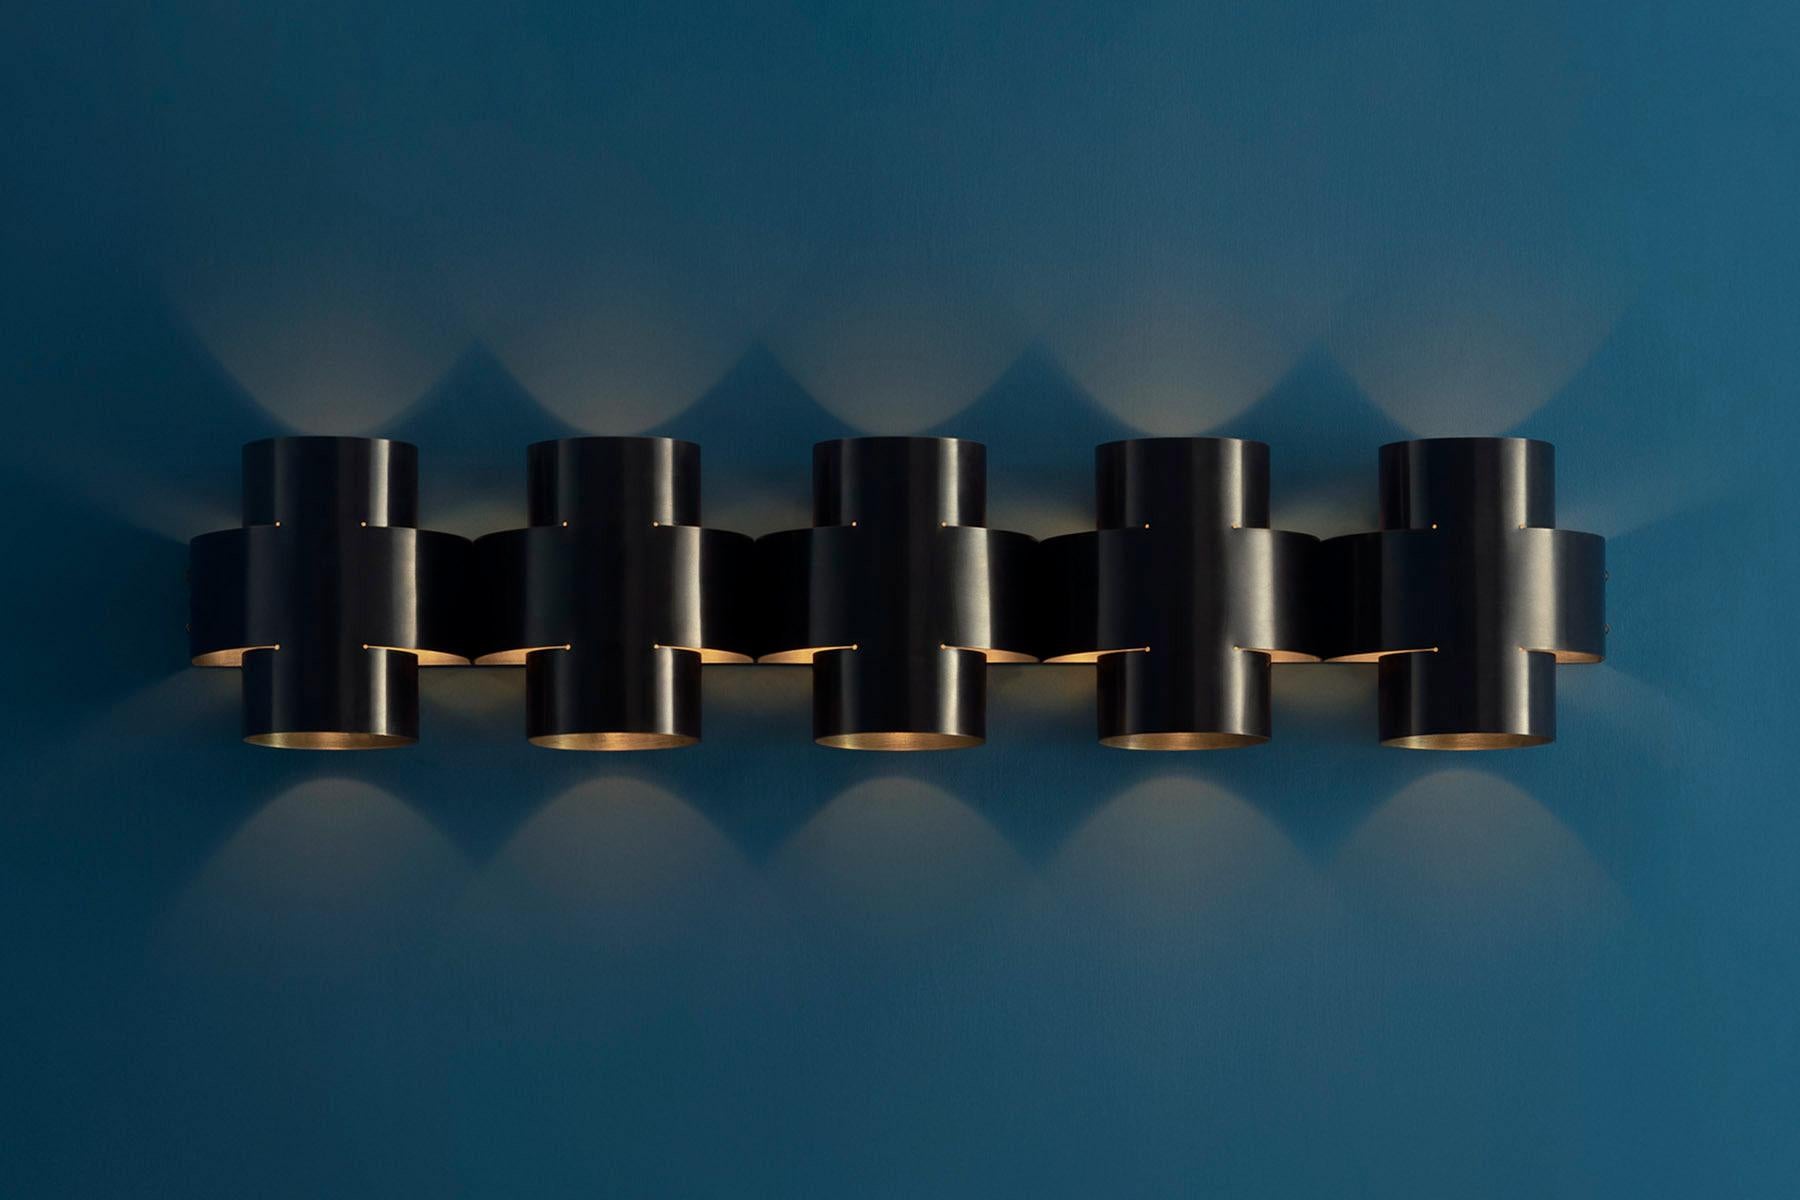 Contemporary Aged Brass Wall Sconce, Plus Five Appliqué by Paul Matter

PLUS Series is a new range of appliqués by Paul Matter that feature a simple shape in singular and repetitive arrangements. A 3-Dimensional plus is formed out of a single tube